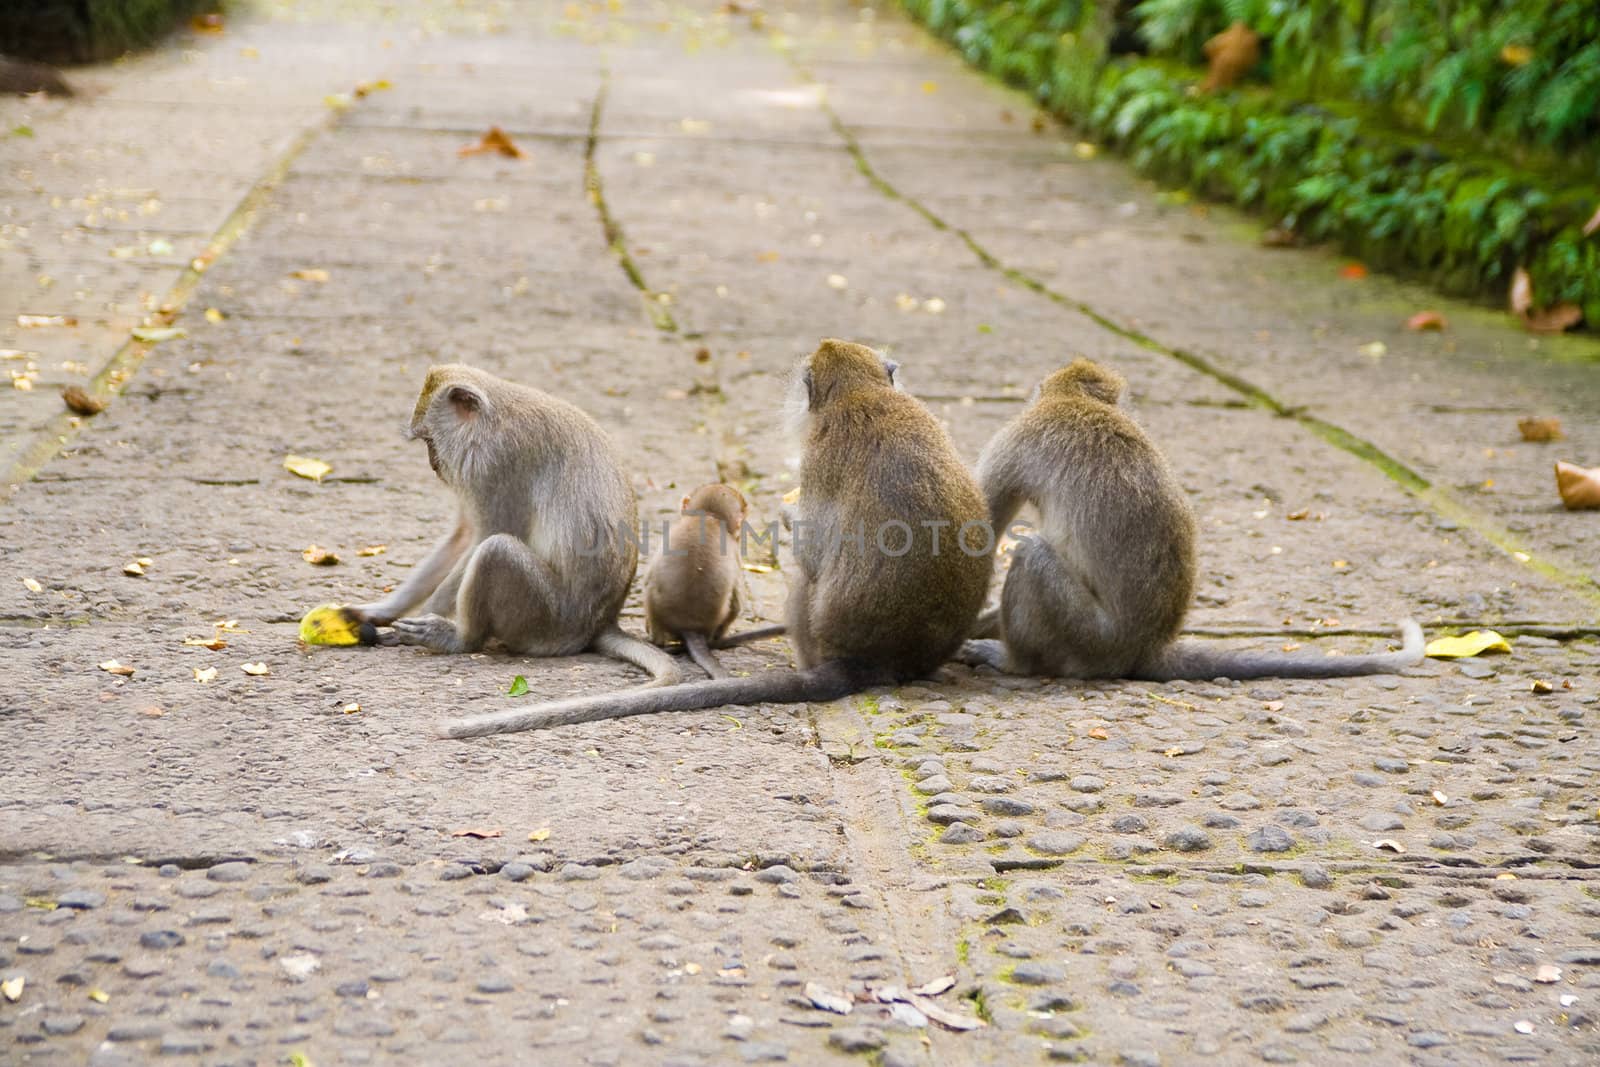 Four different aged monkeys sitting on path, showing their back